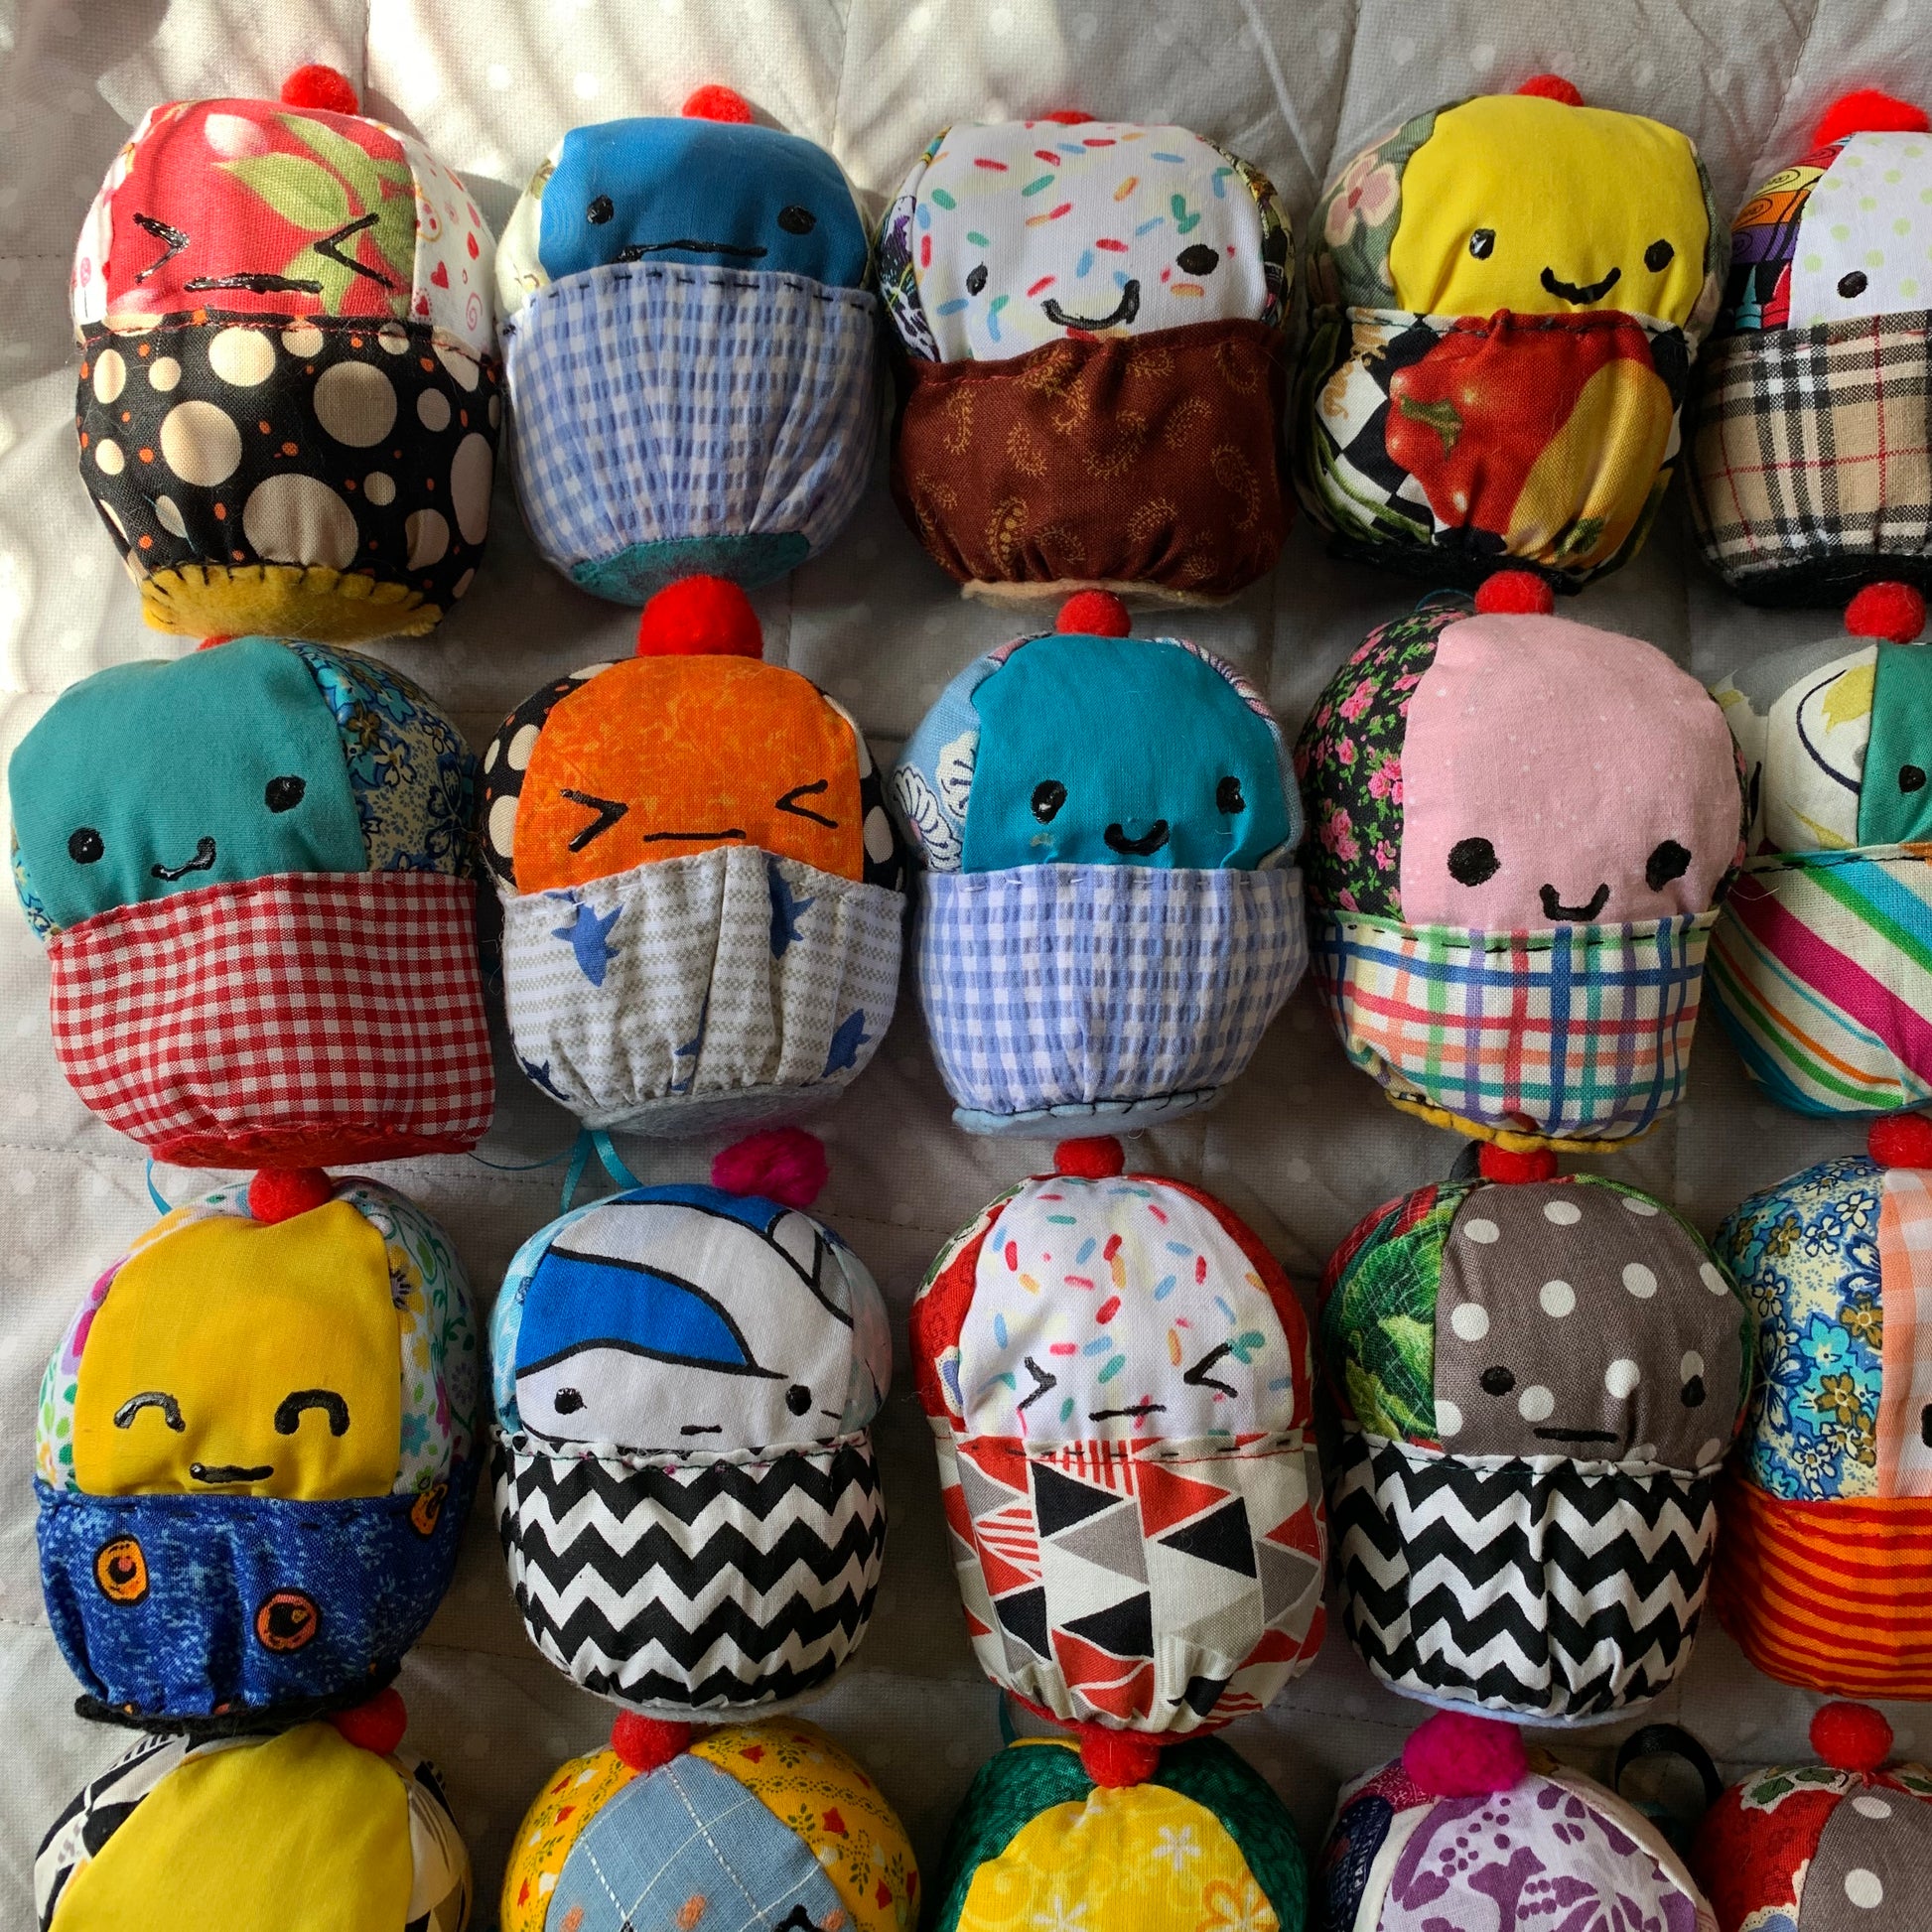 A closer view of colorful plush cupcakes with various facial expressions. Set up in a square formation.